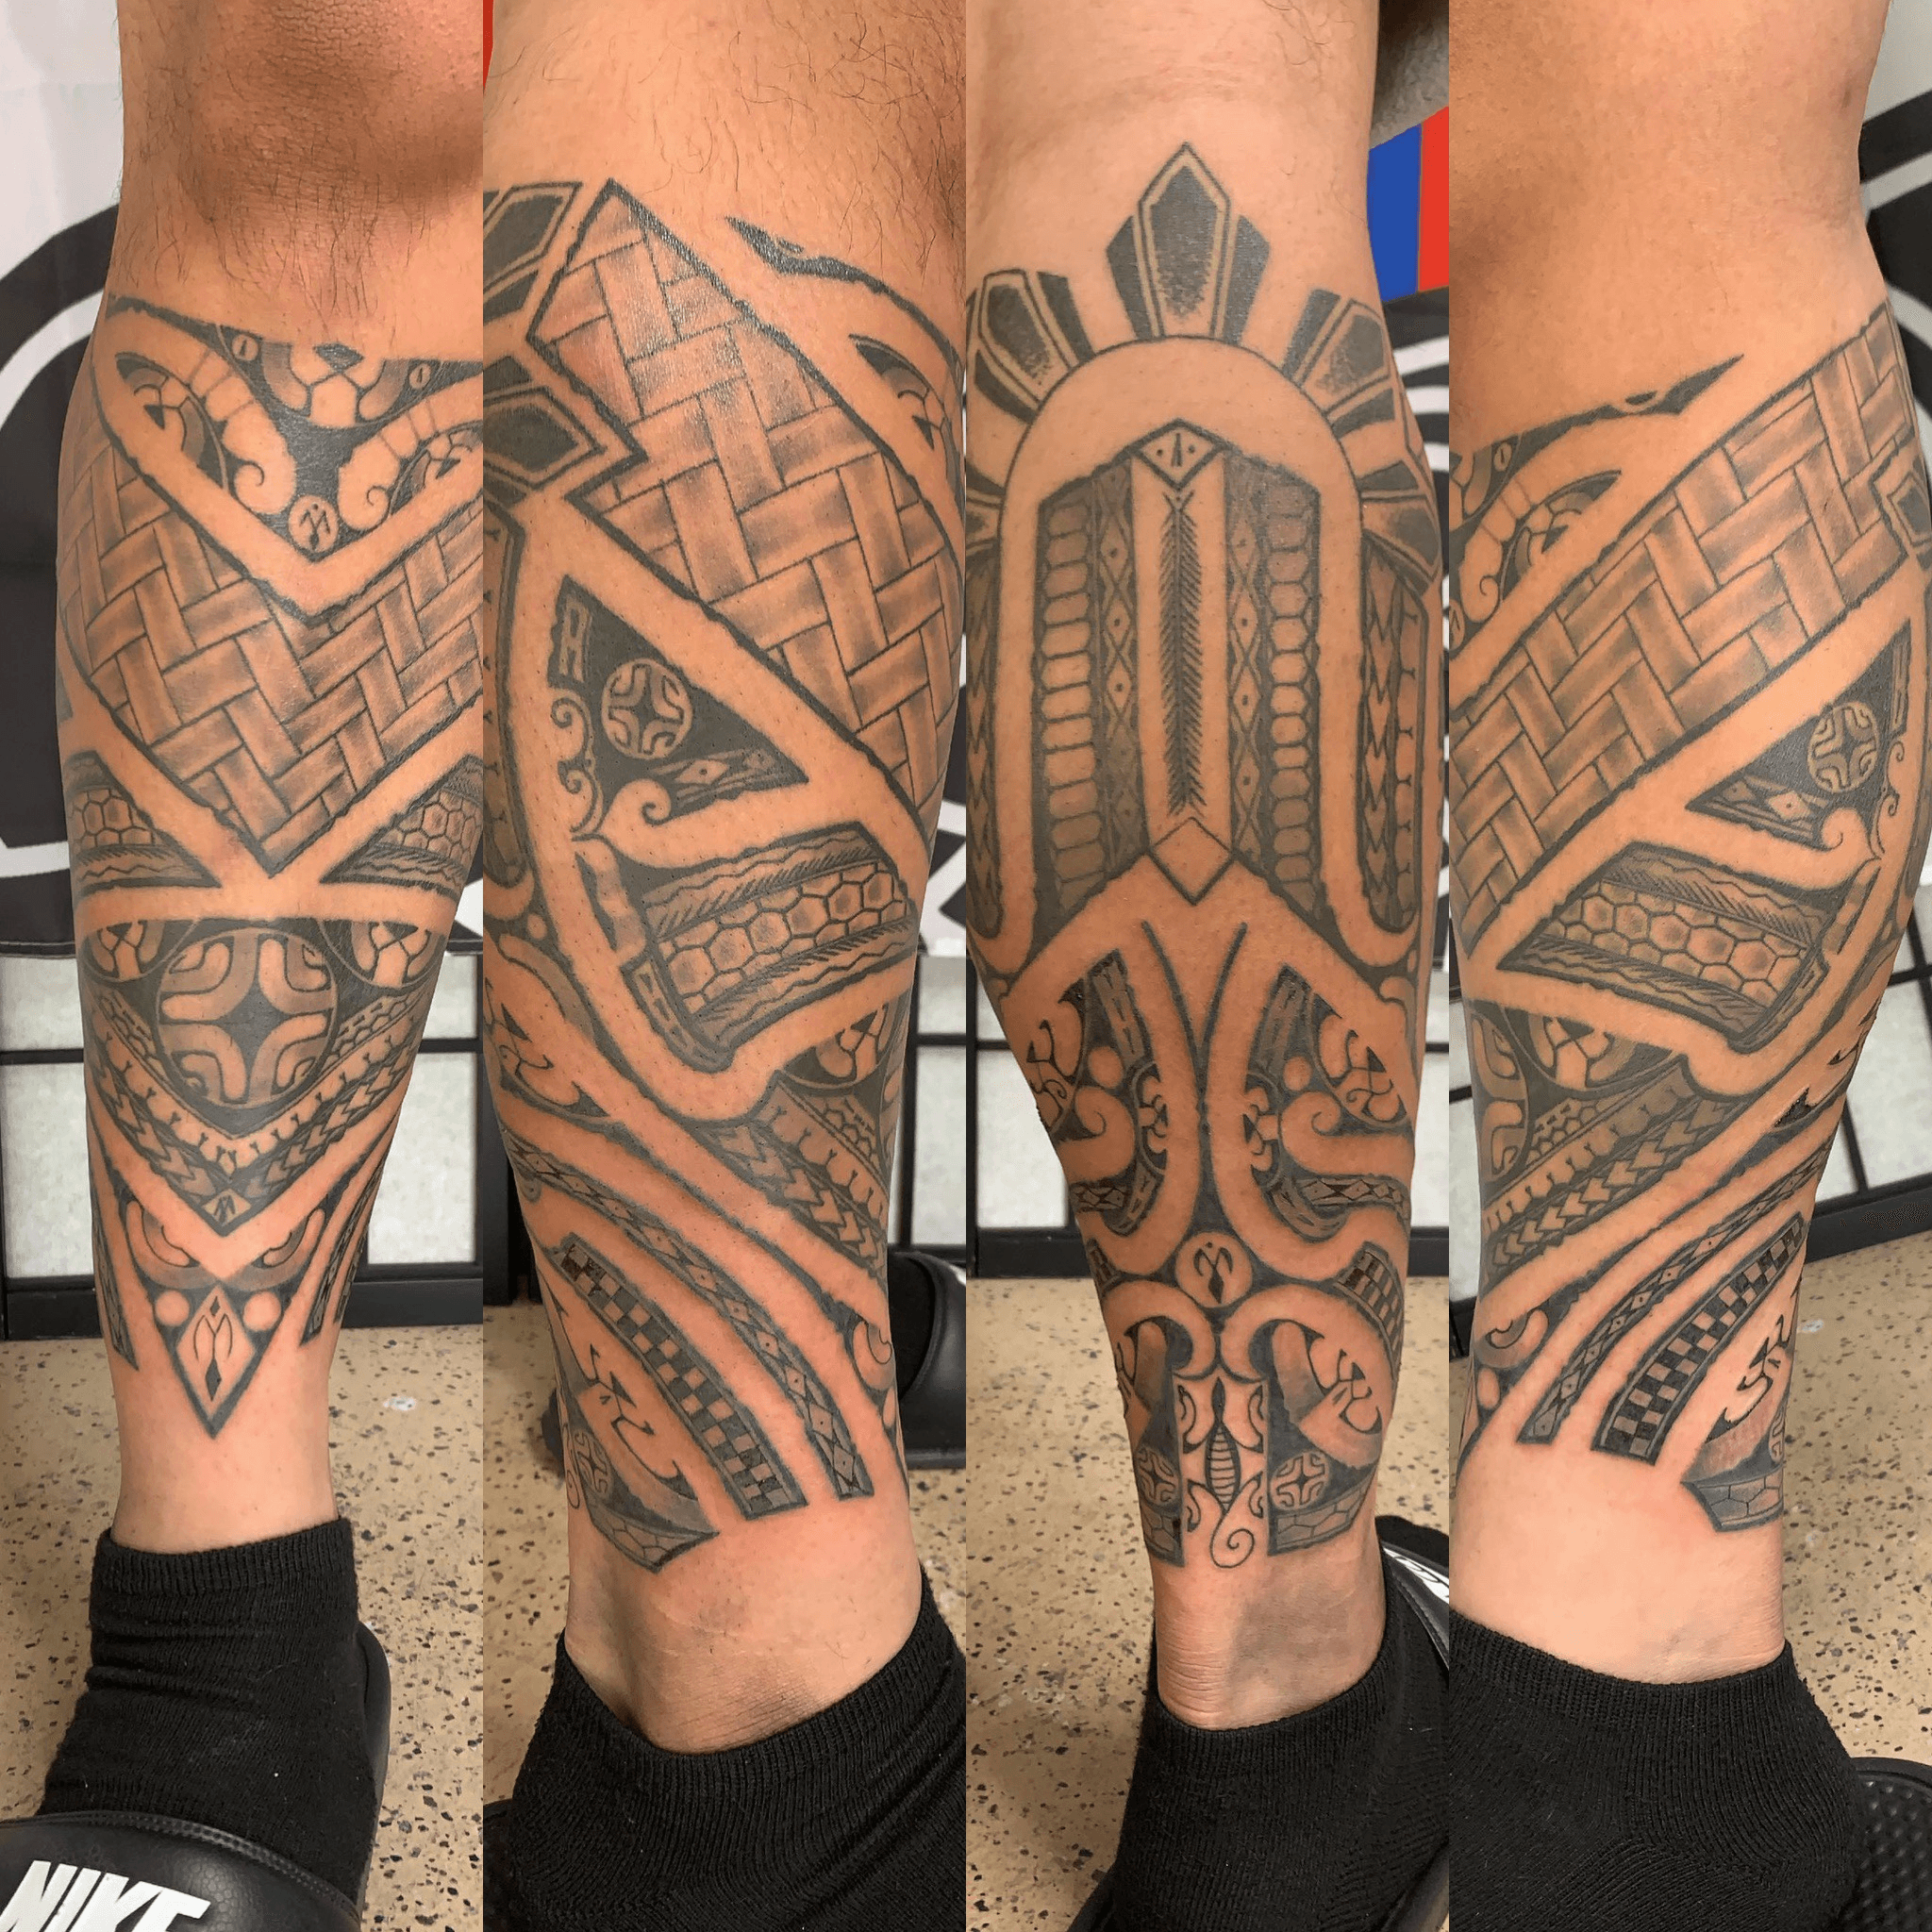 First tattoo Work done by Mike at Coral City Tattoo in Honolulu Hawaii   rtattoo